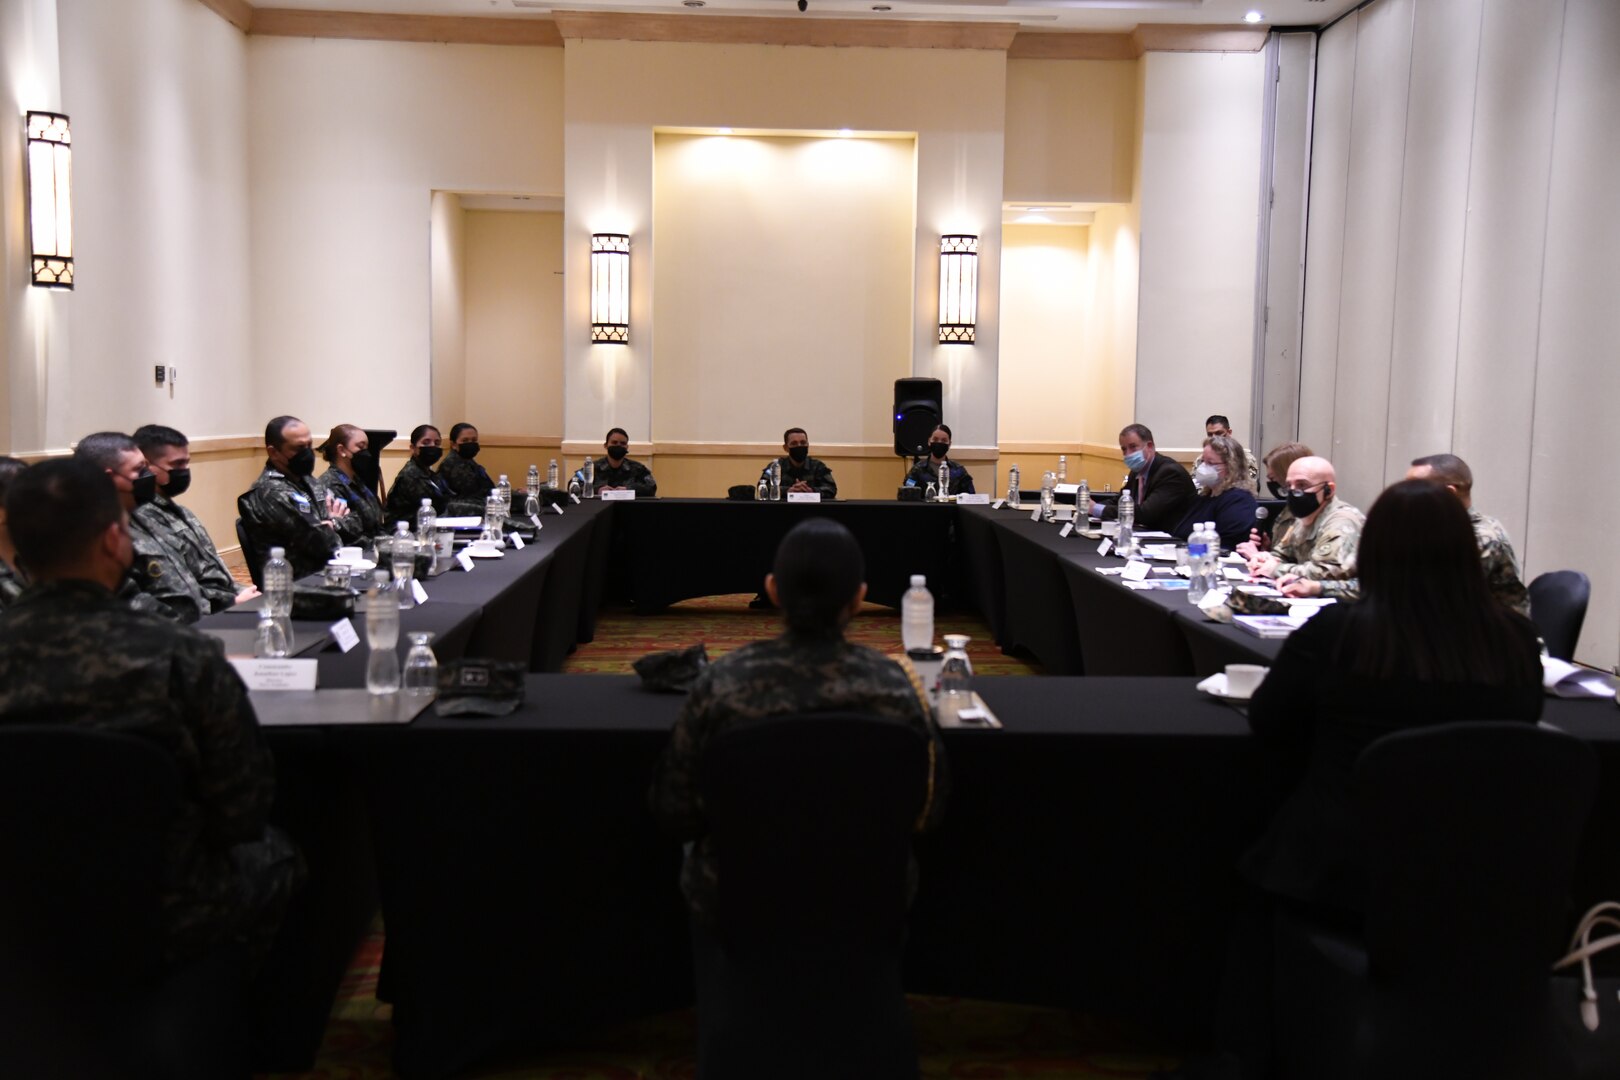 U.S. Army Gen. Laura Richardson, commander of U.S. Southern Command, and U.S. Army Command Sgt. Maj. Benjamin Jones, SOUTHCOM Senior Enlisted Advisor, take part in a roundtable discussion with Honduran military personnel.